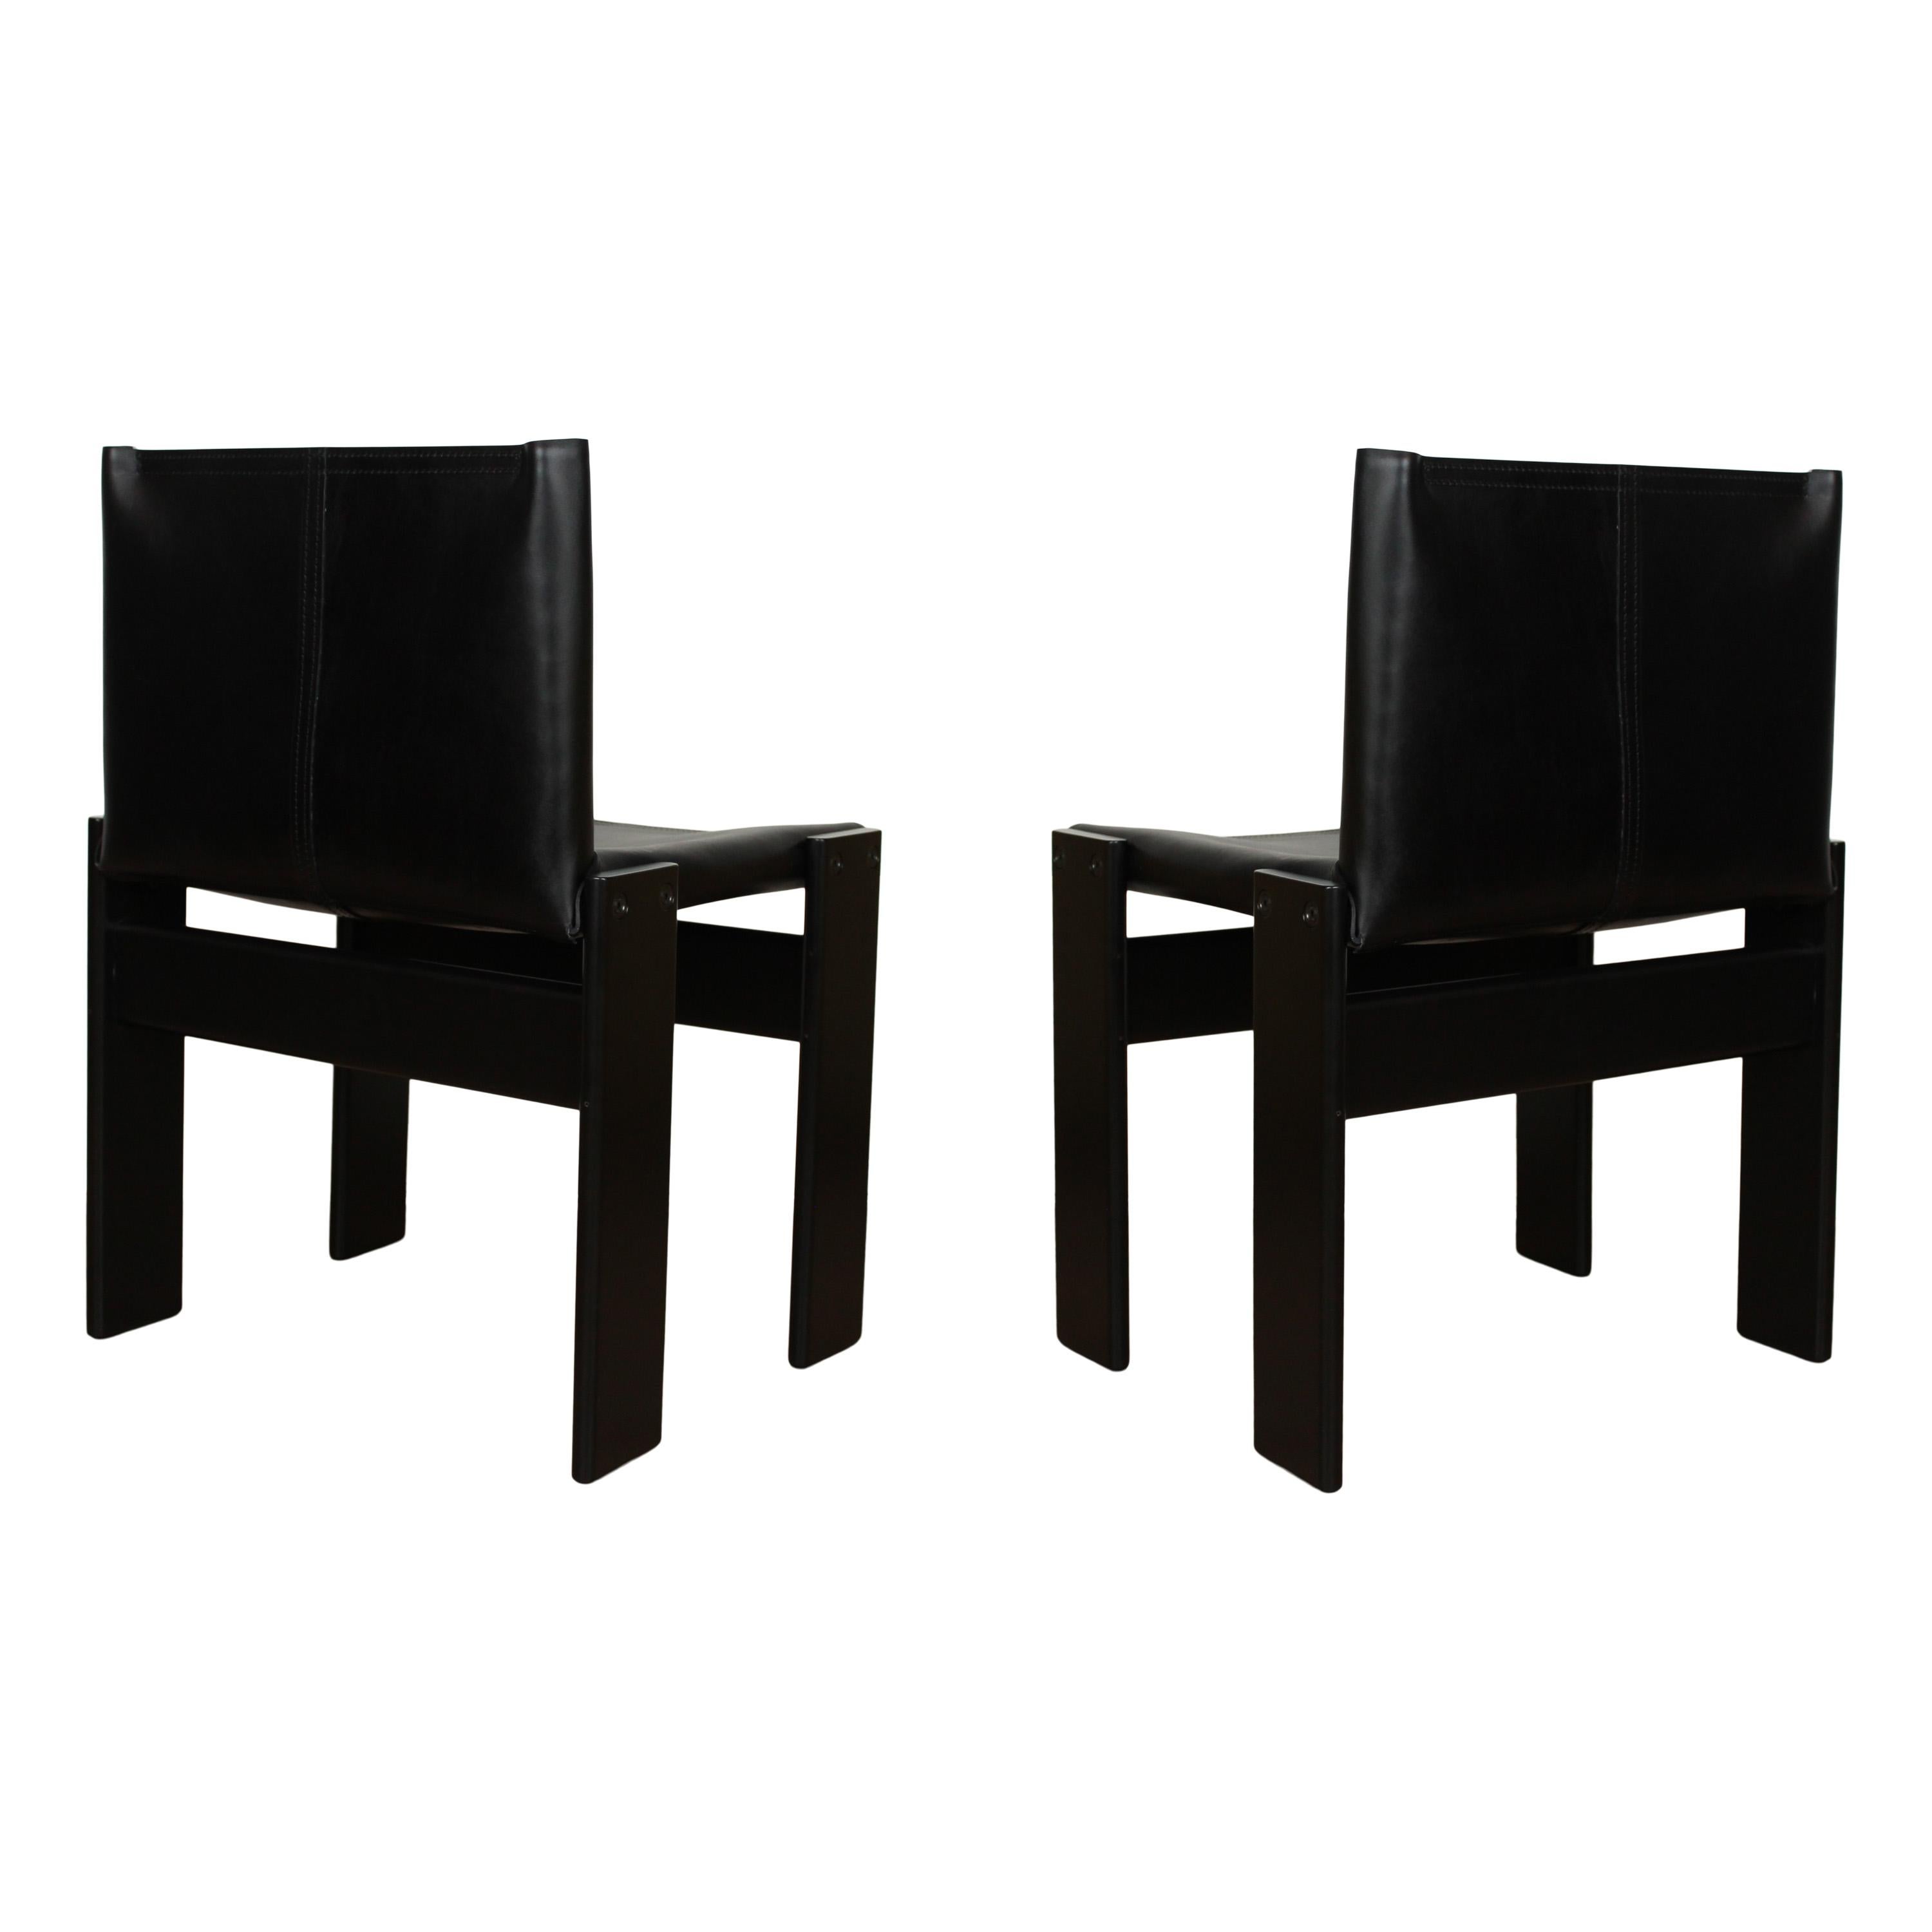 Afra & Tobia Scarpa Black Lacquered Monk Dining Chair for Molteni, Set of 6 For Sale 2